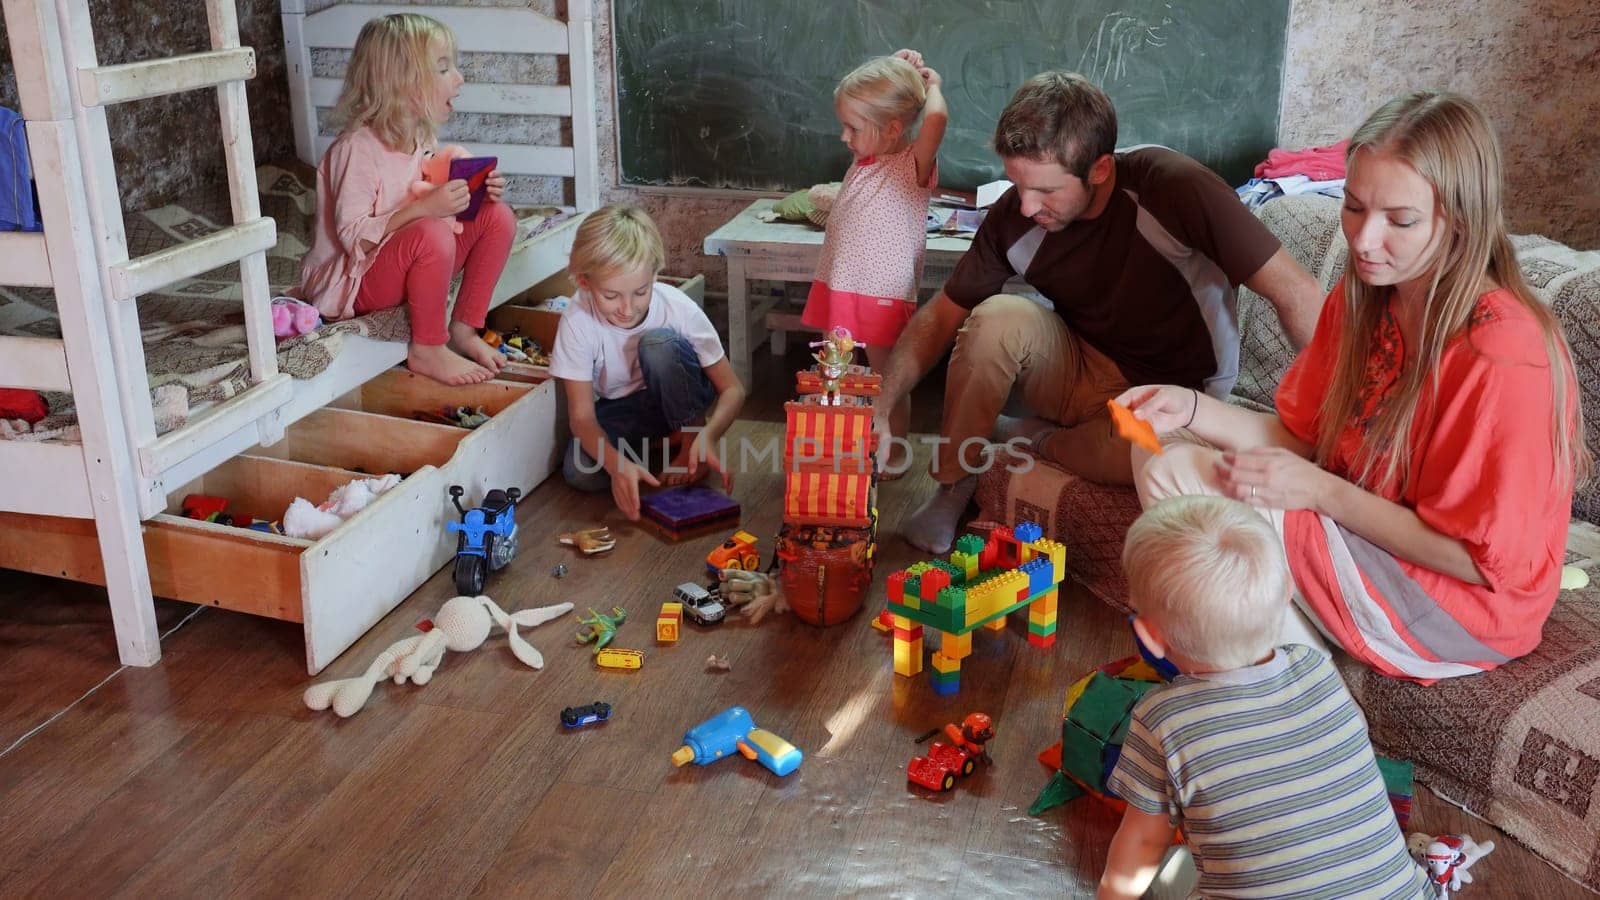 A friendly family with children playing toys at home